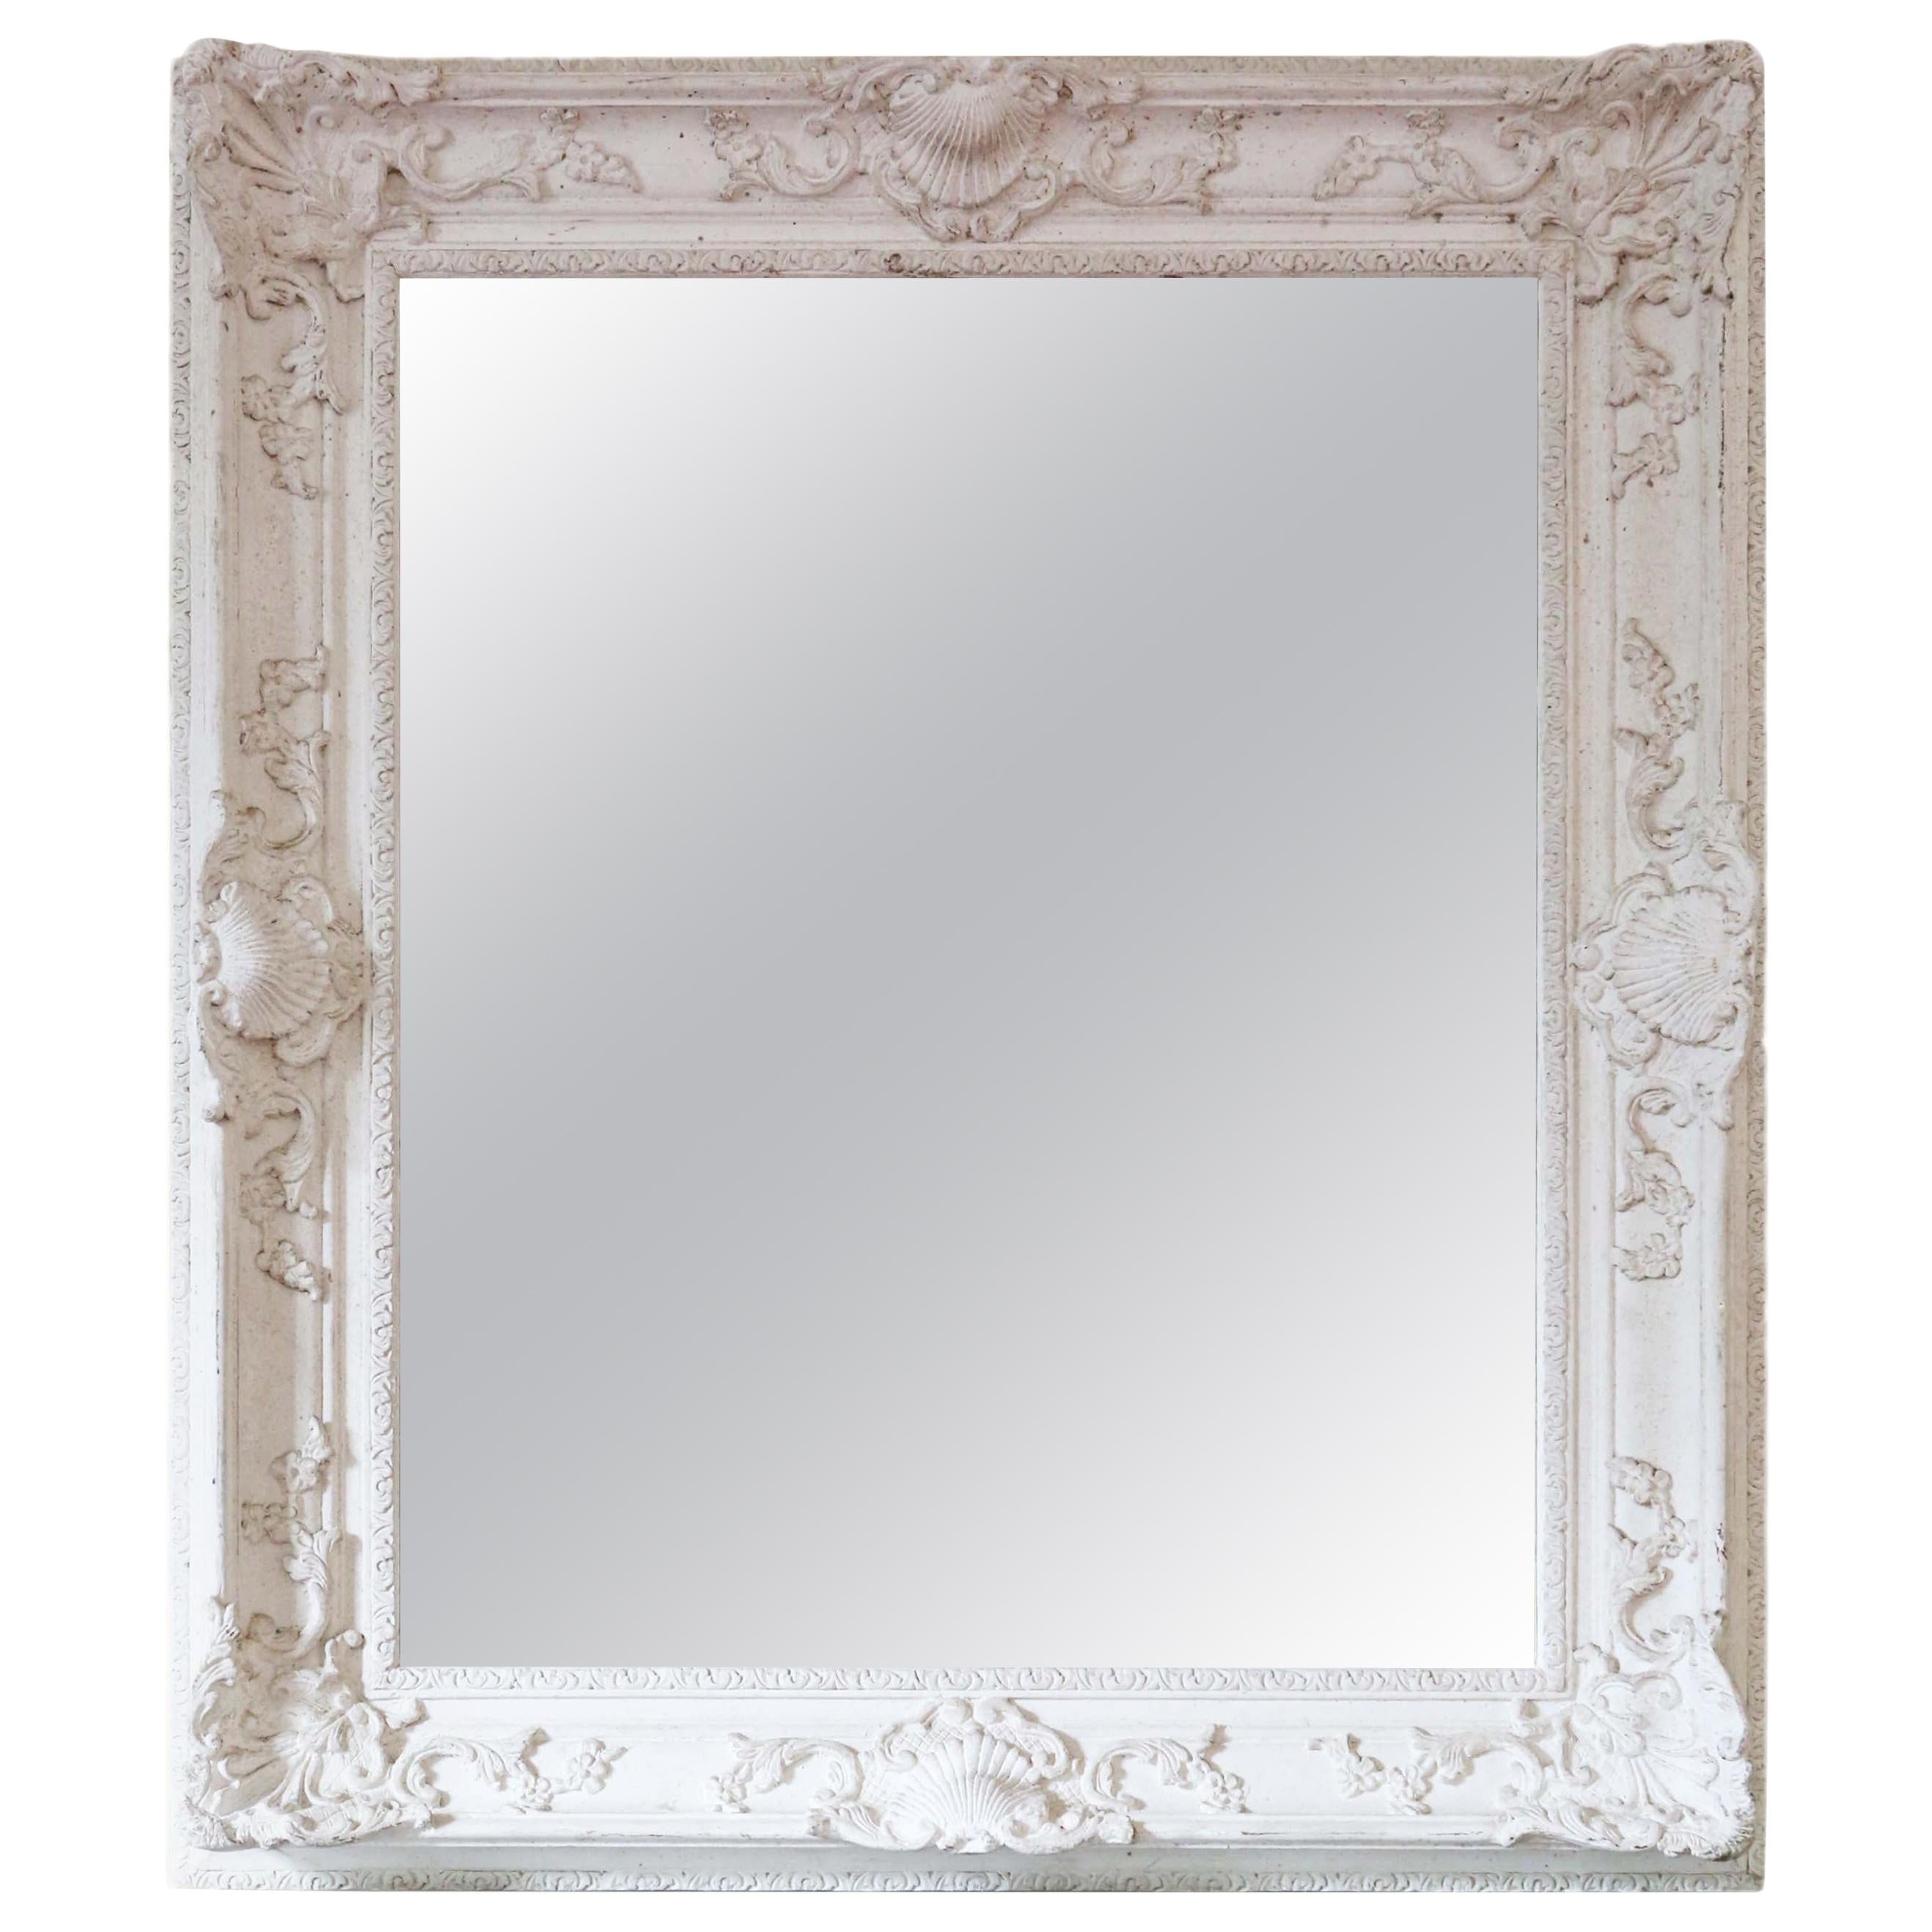 Antique Large Natural Gesso Overmantle or Wall Mirror, Mid 20th Century